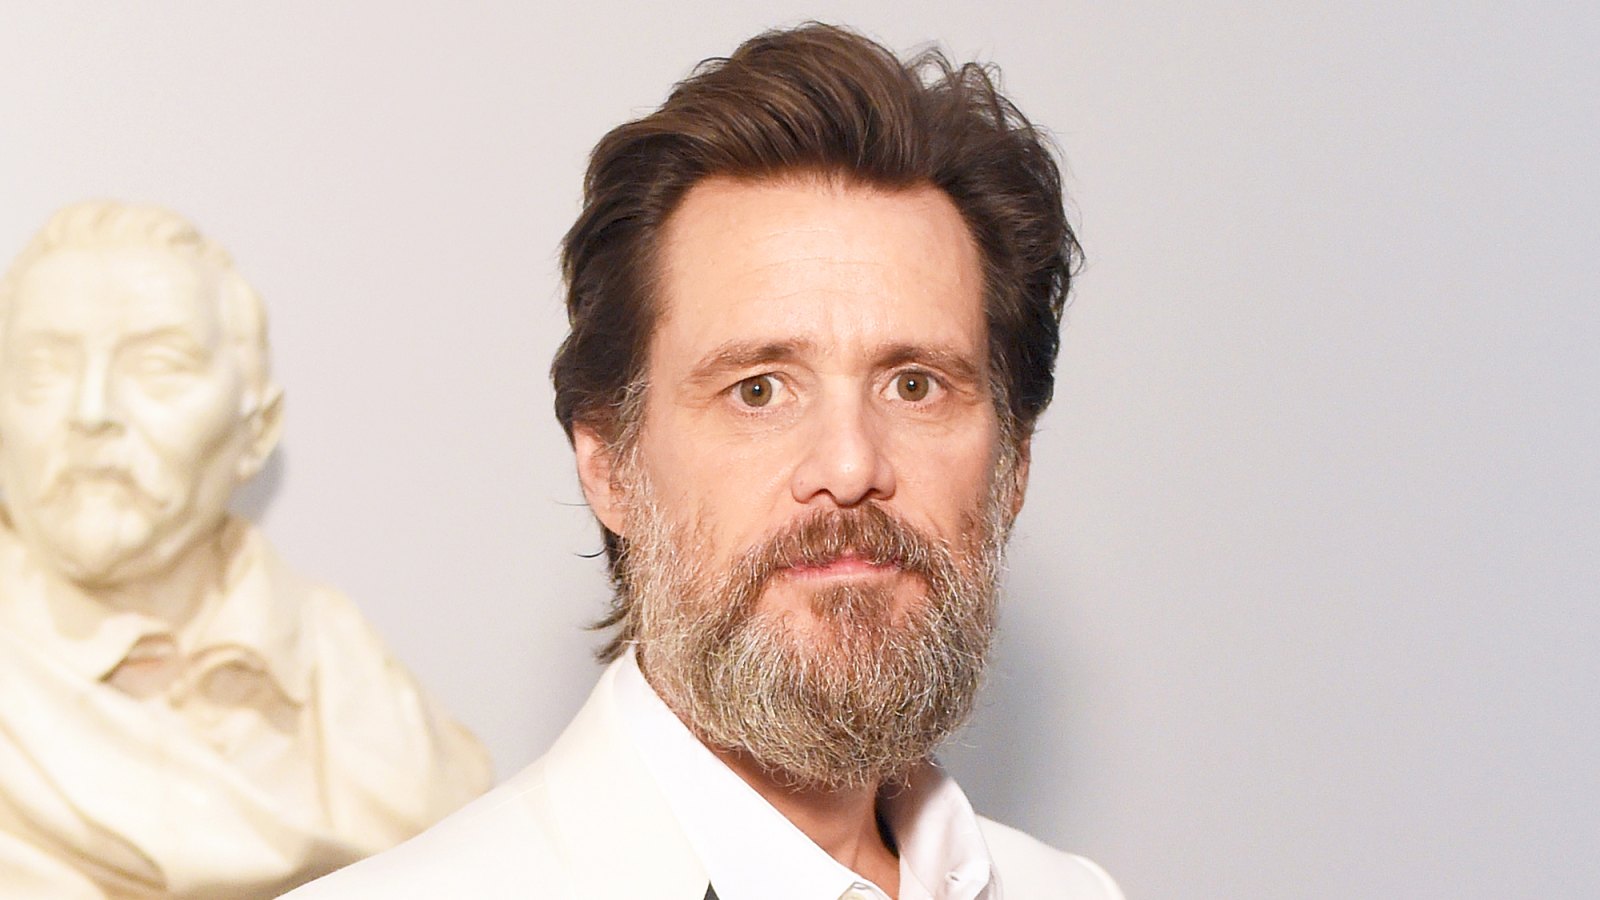 Jim Carrey attends LACMA's 50th Anniversary Gala sponsored by Christie's at LACMA on April 18, 2015 in Los Angeles, California.